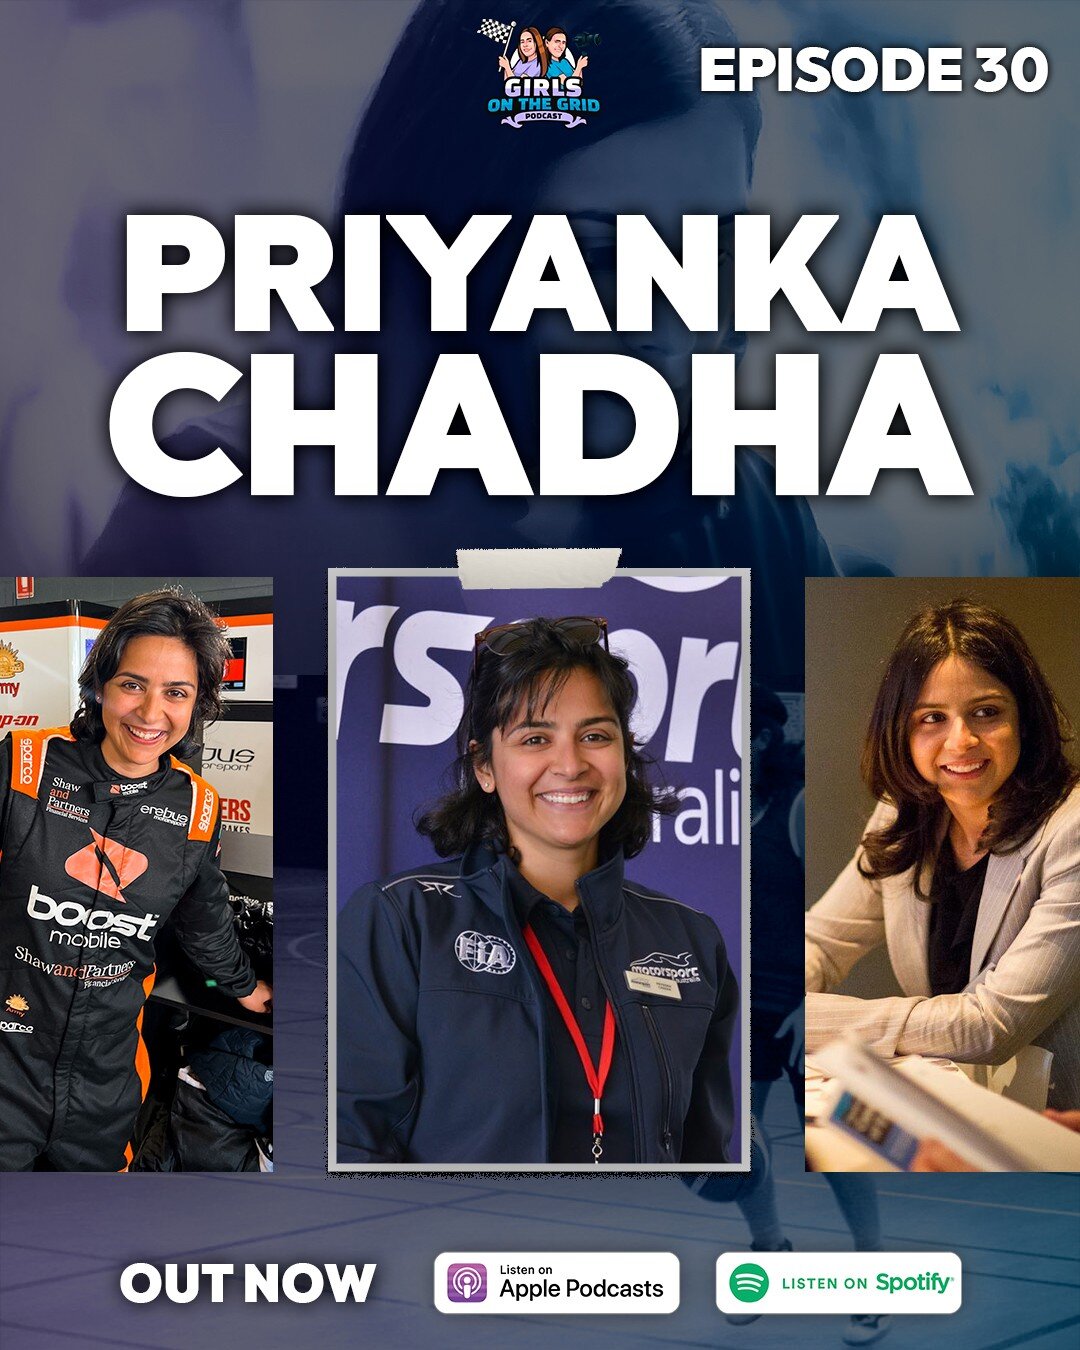 For episode 30, we speak to a lady who is doing incredible things for women in motorsport. Priyanka Chadha is the national participation lead at Motorsport Australia, and is responsible for organising and excepting on programs such as Girls On Track.